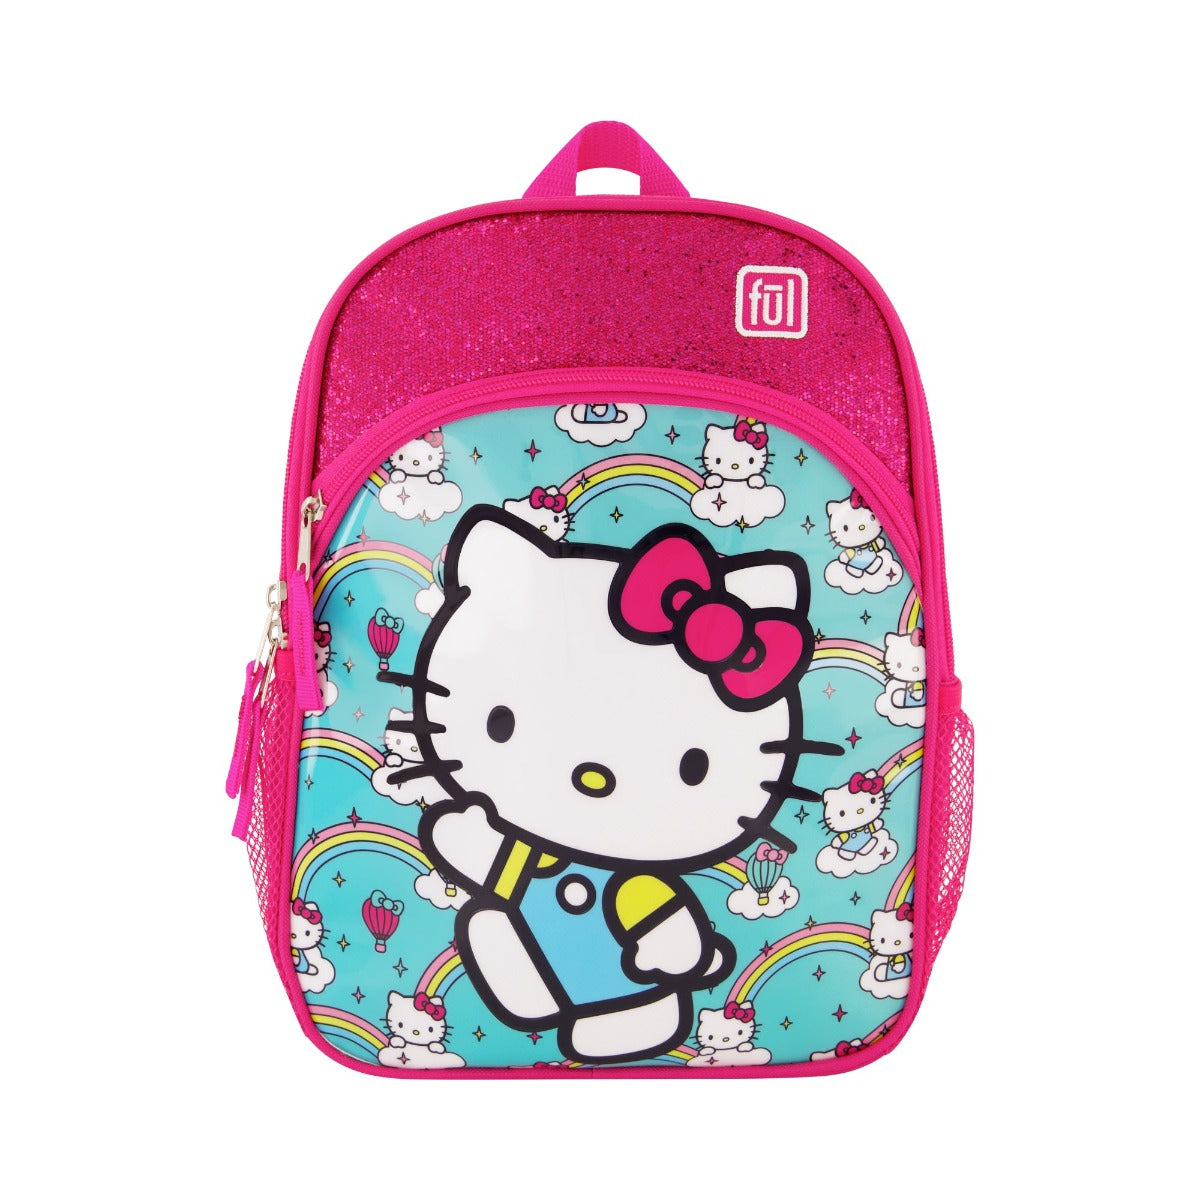 Hello Kitty Ful Rainbows matching 2 piece set - 13" carry-on backpack for kids